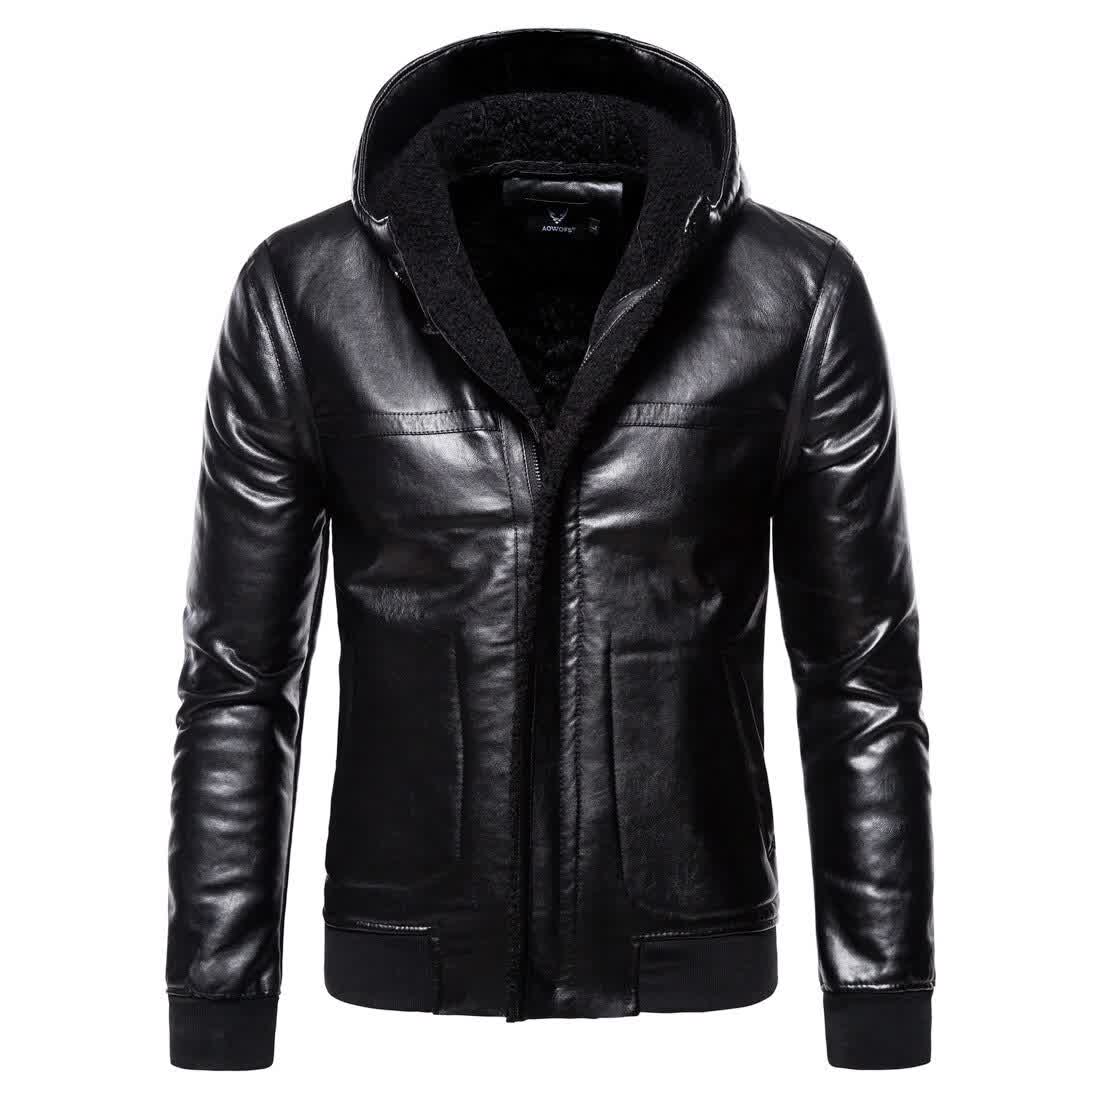 Winter Hooded Leather Jackets Thicker Warm Leather Jackets and Coats Good Quality Men Slim Fit Black Lether Jackets